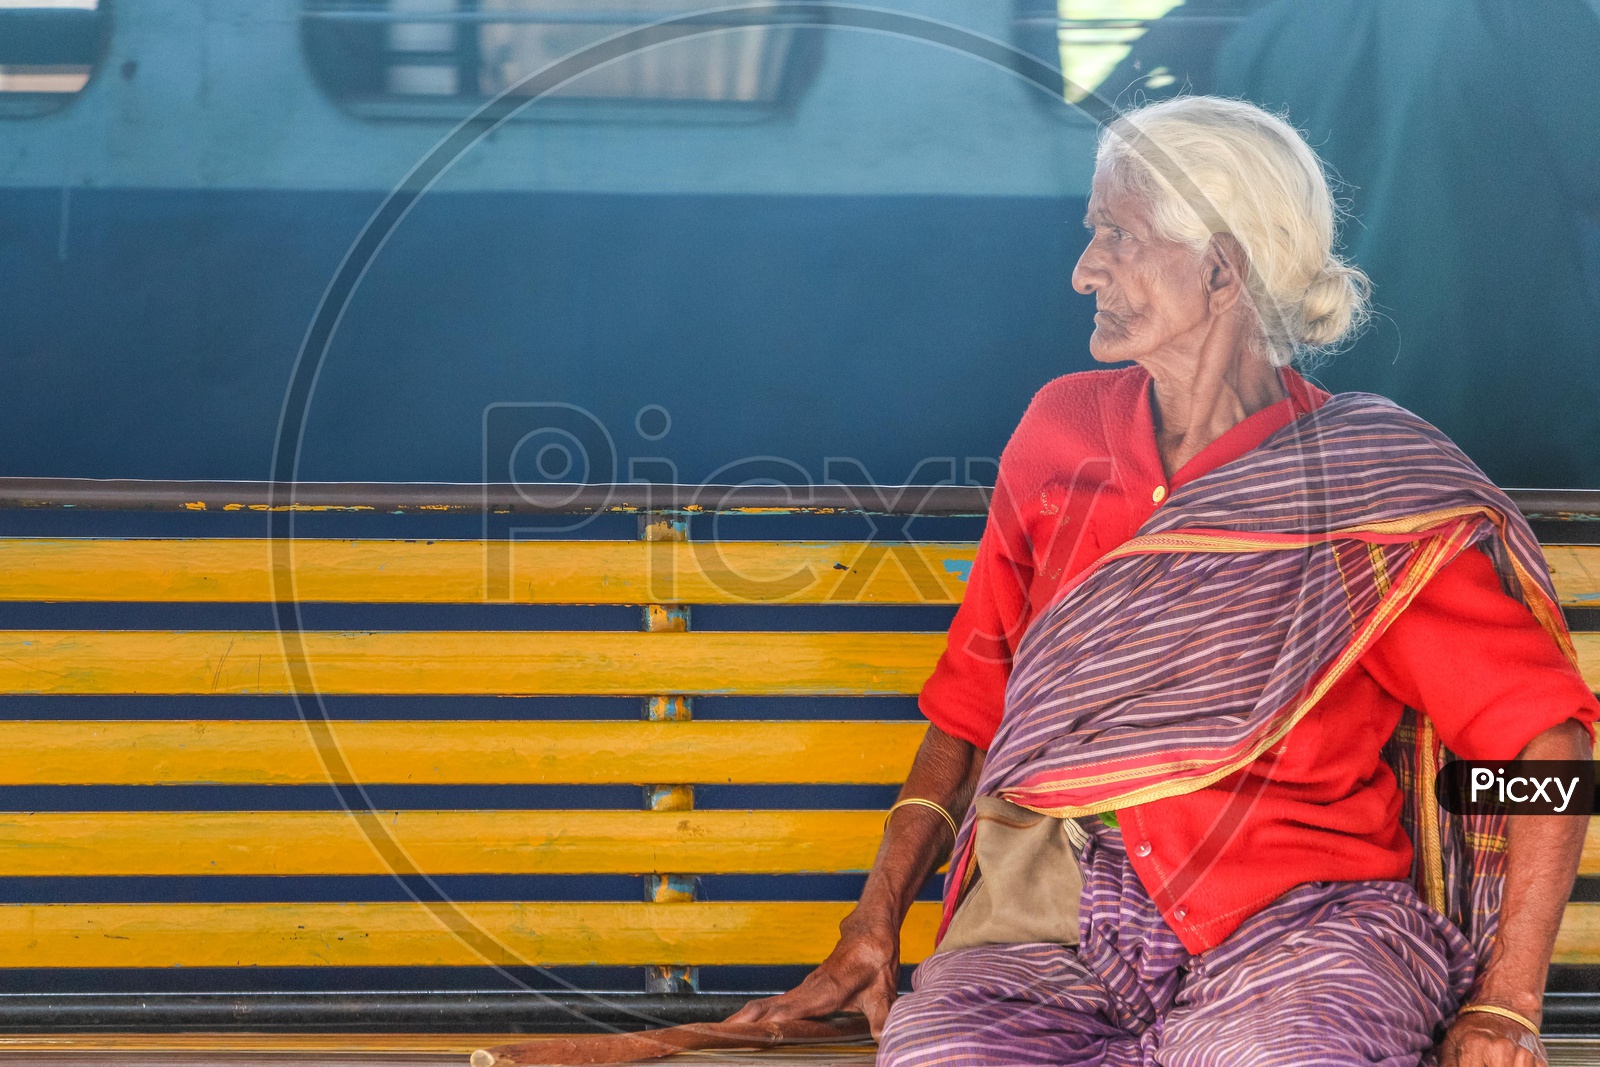 An Old Woman Sitting on a Bench In a Railway Station